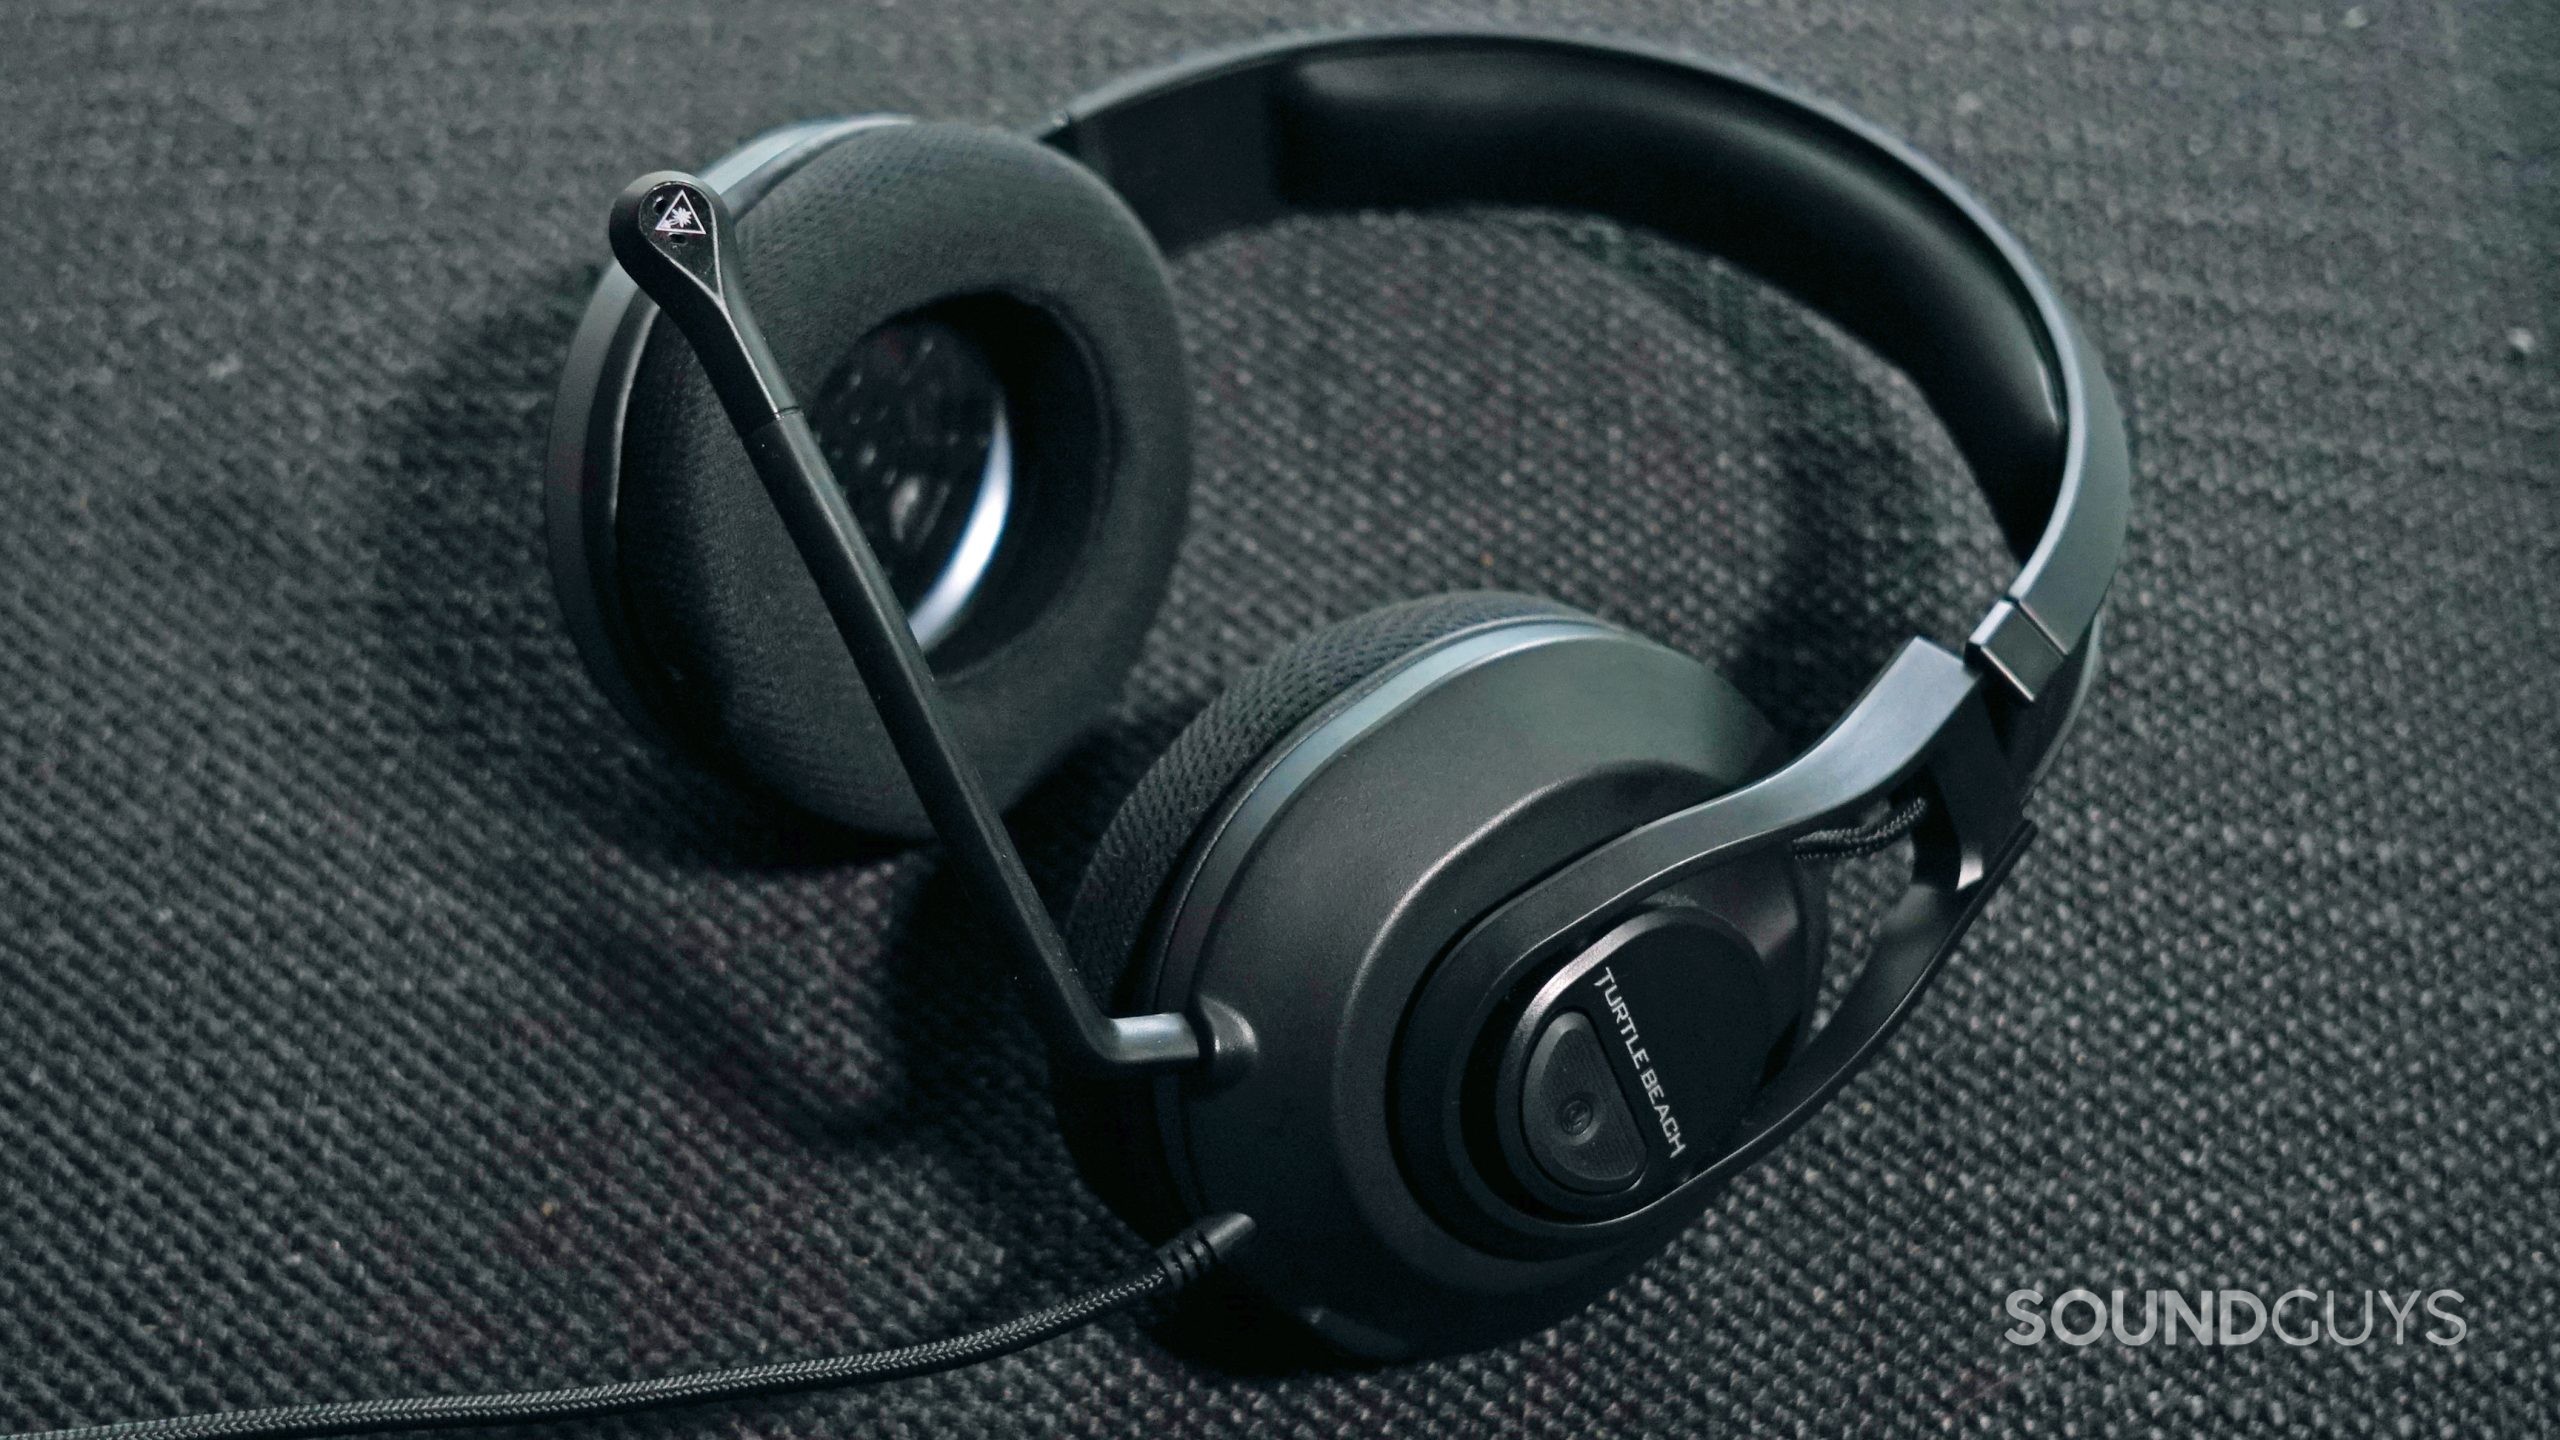 The Turtle beach Recon 500 lays on a fabric surface.